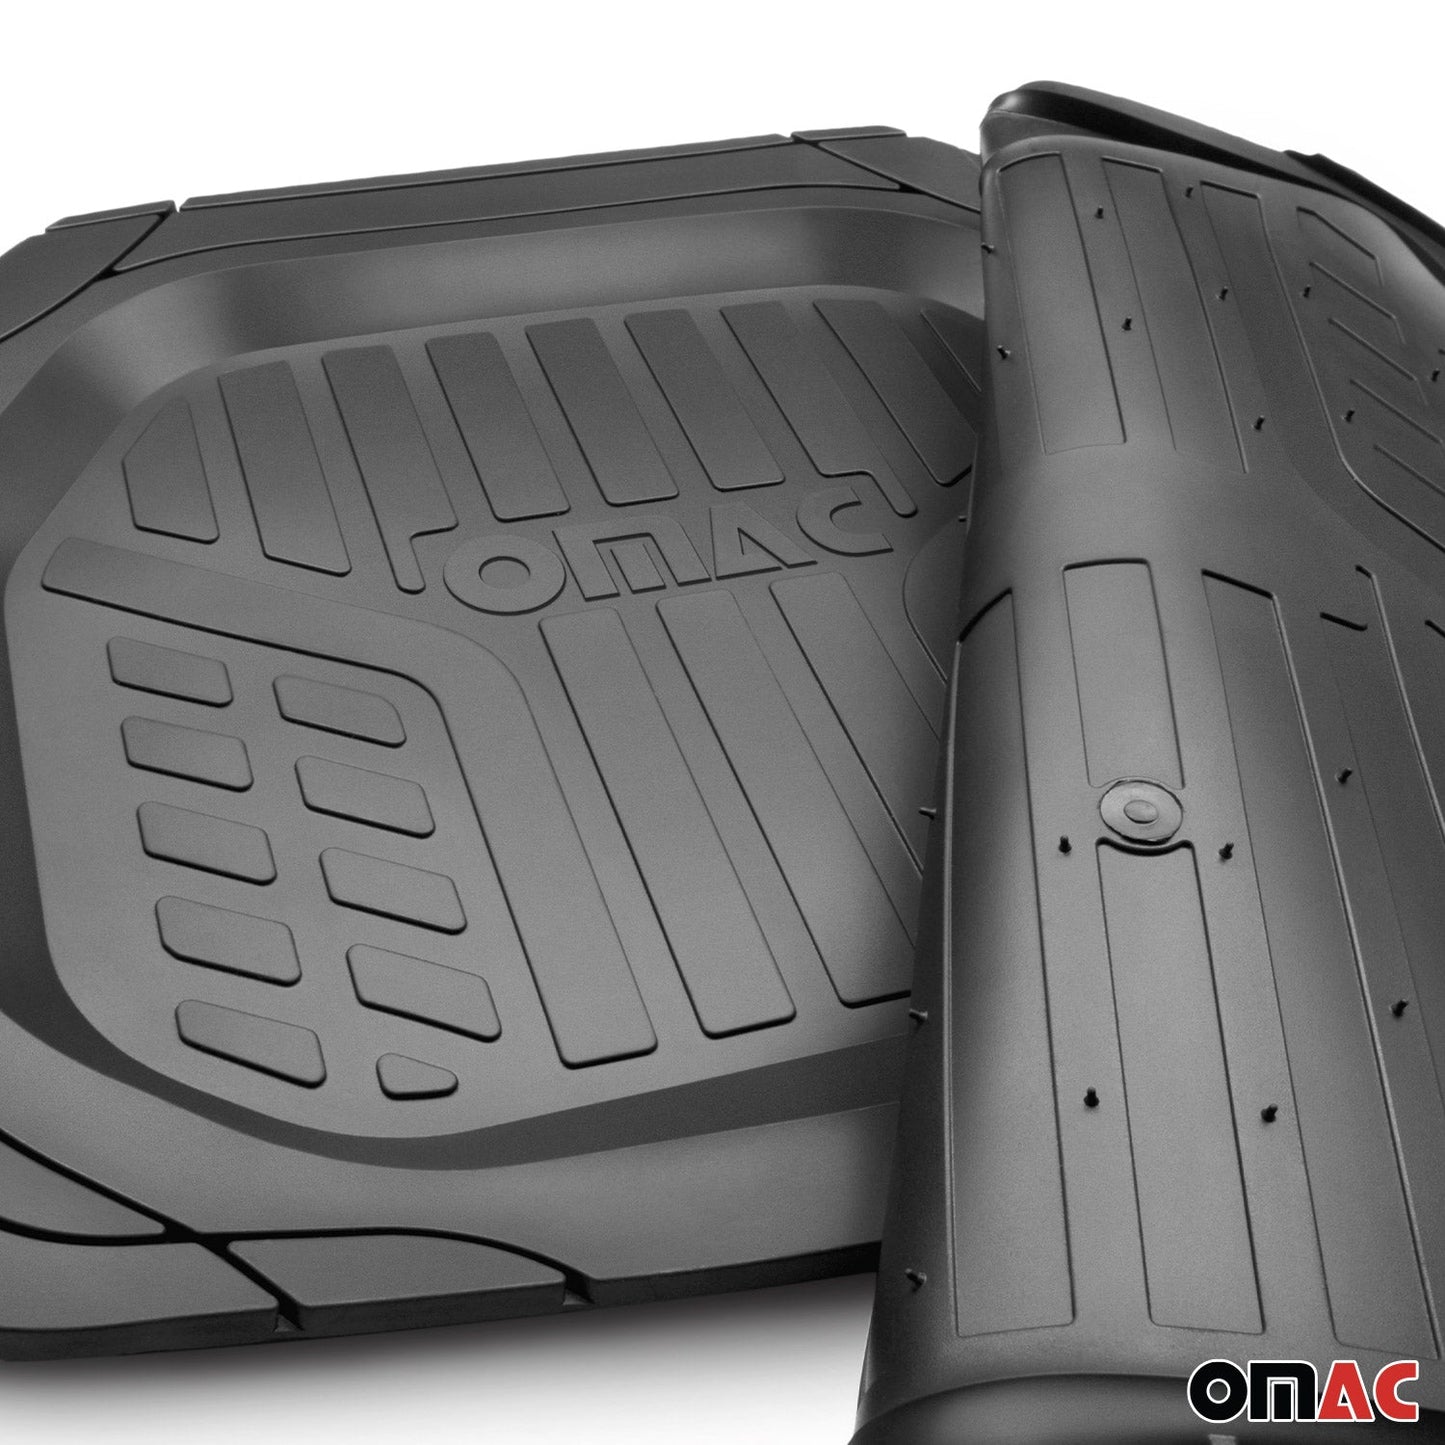 OMAC Trimmable Floor Mats Liner Waterproof for Honda Fit 3D Black All Weather 4Pcs A058277